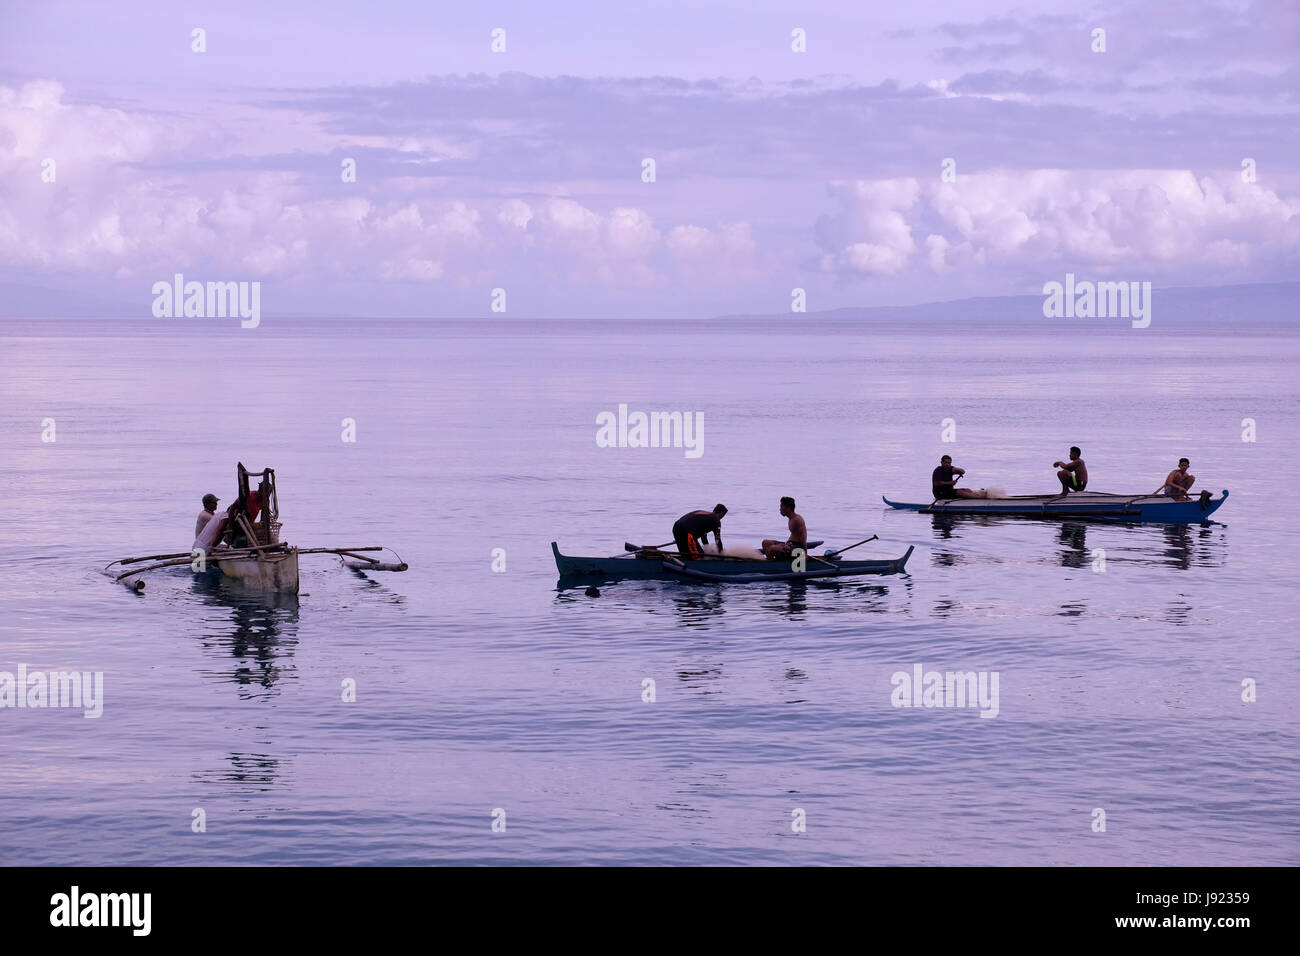 Fishermen in traditional banka outrigger boats in the island of Siquijor located in the Central Visayas region of the Philippines Stock Photo